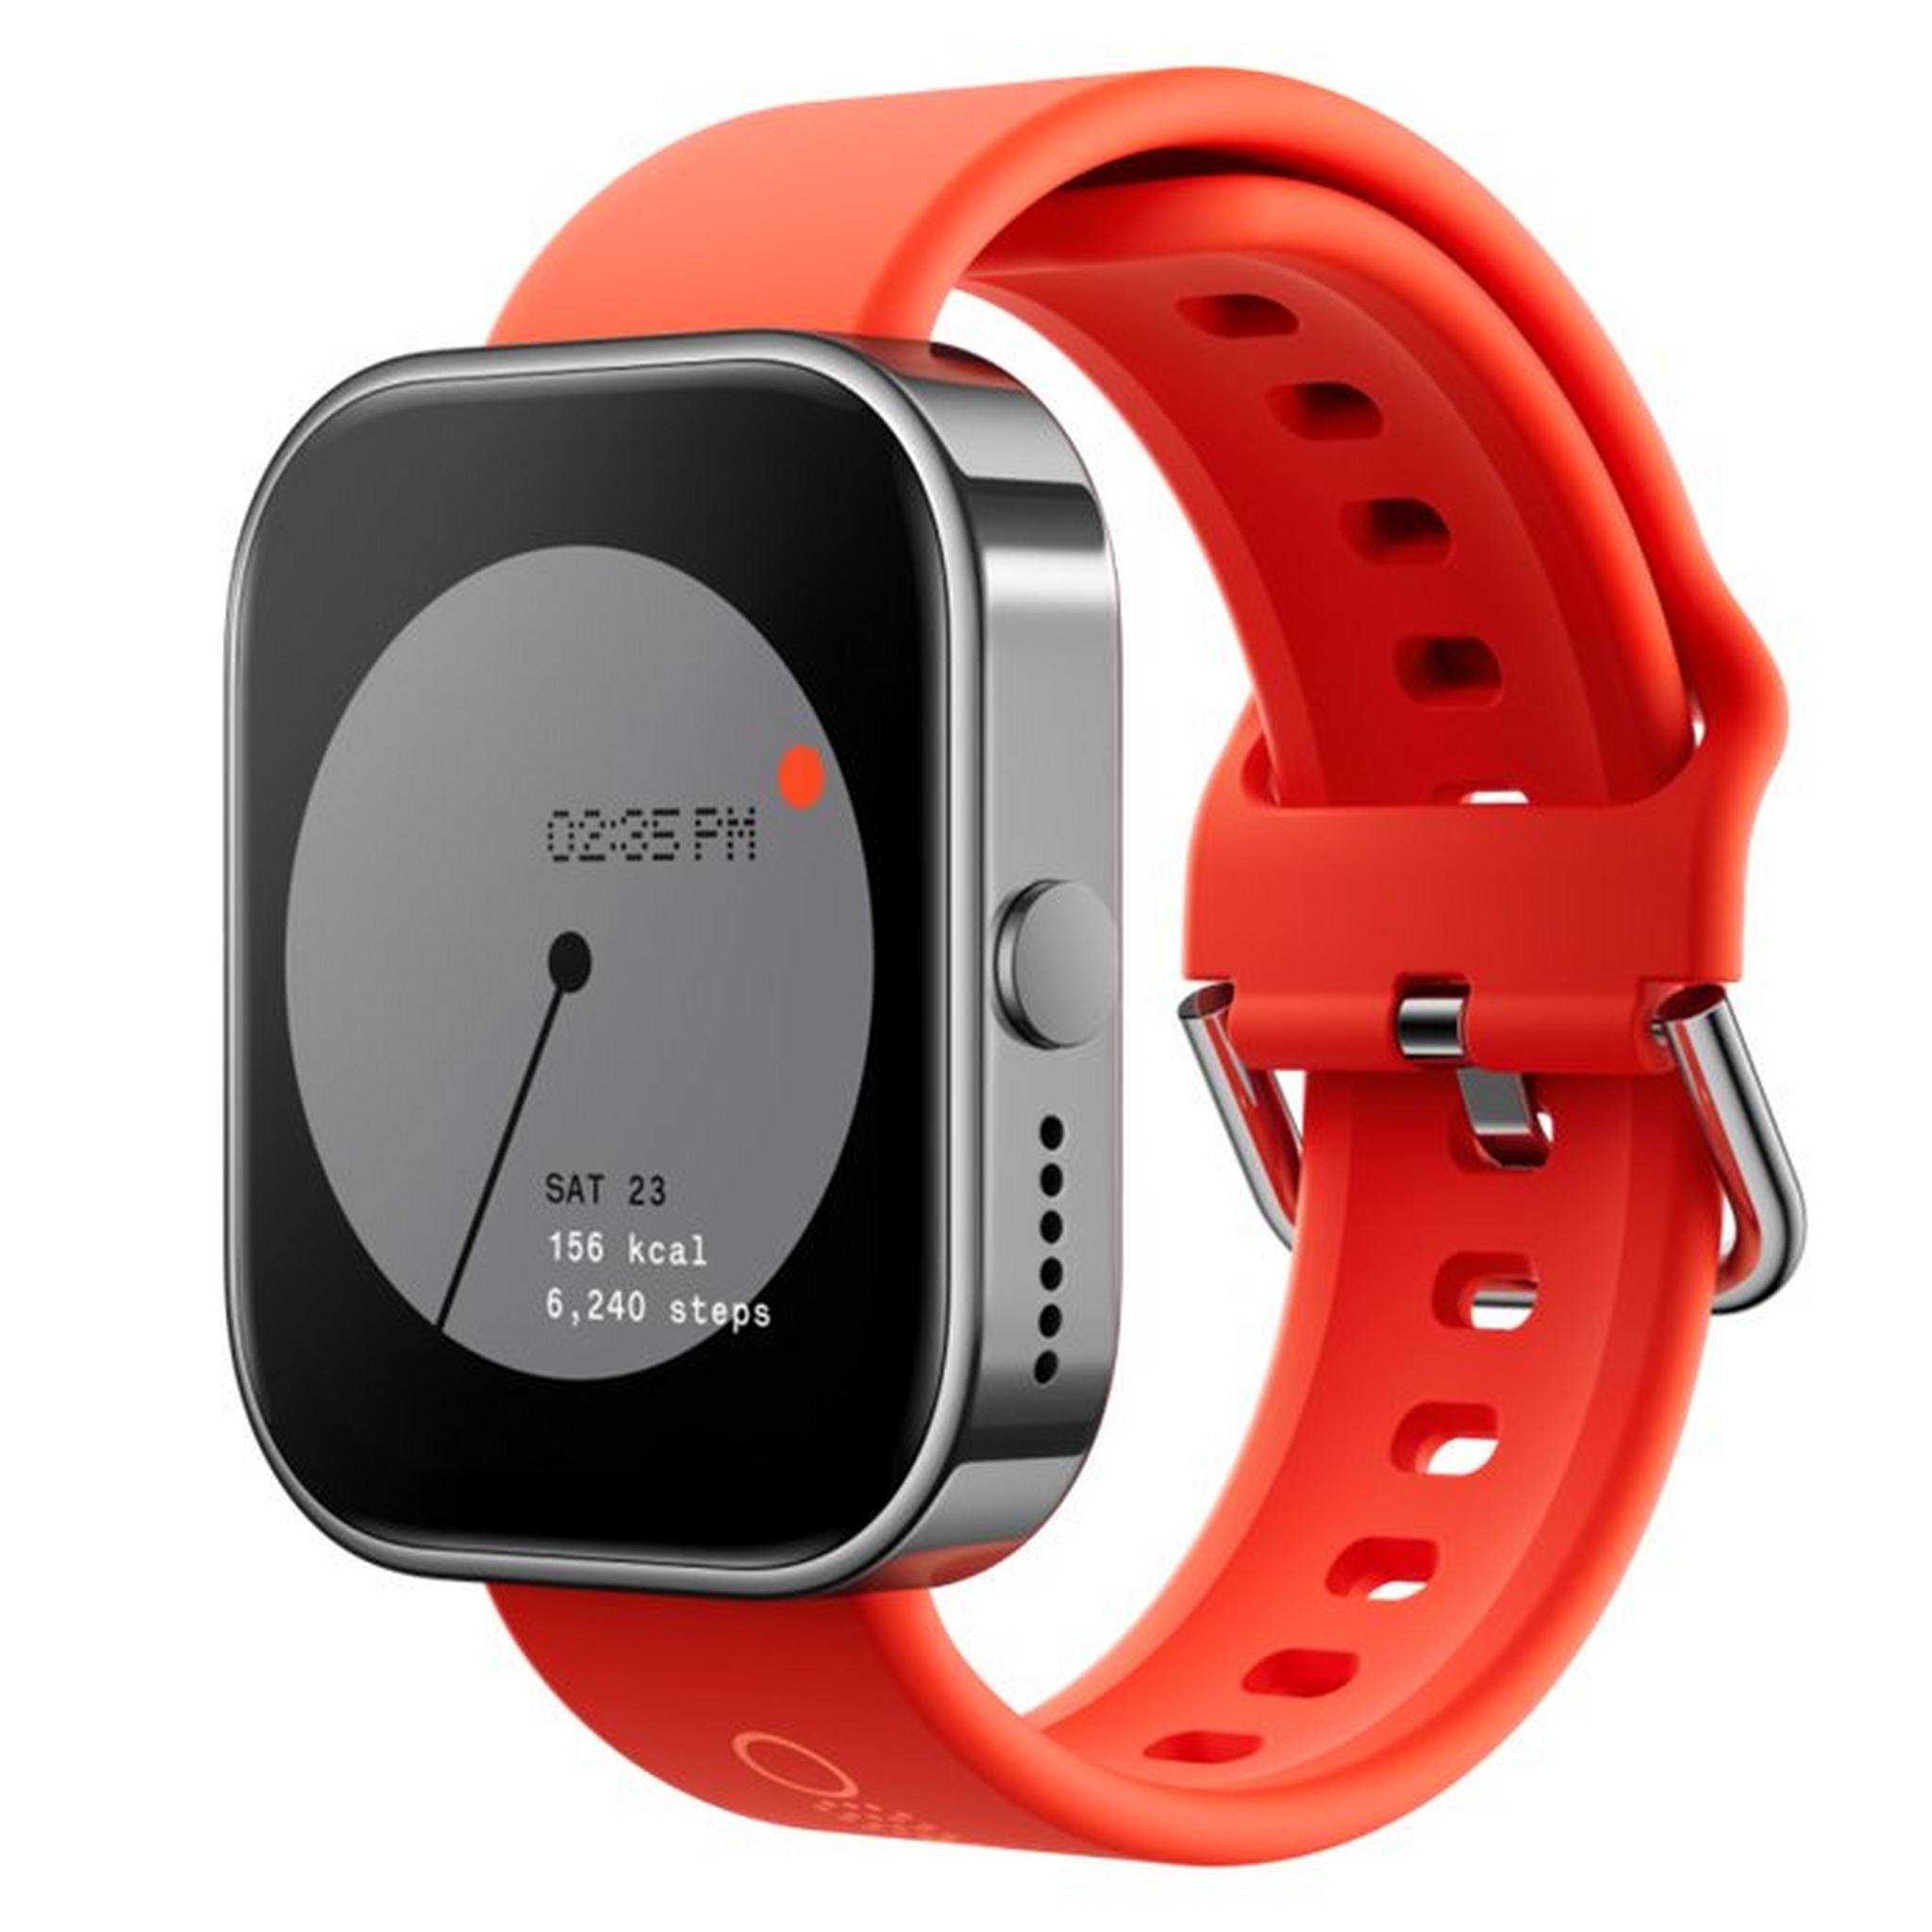 Nothing CMF Watch Pro Smartwatch, 1.96-inch, Silicon Strap, A10700006 - Orange